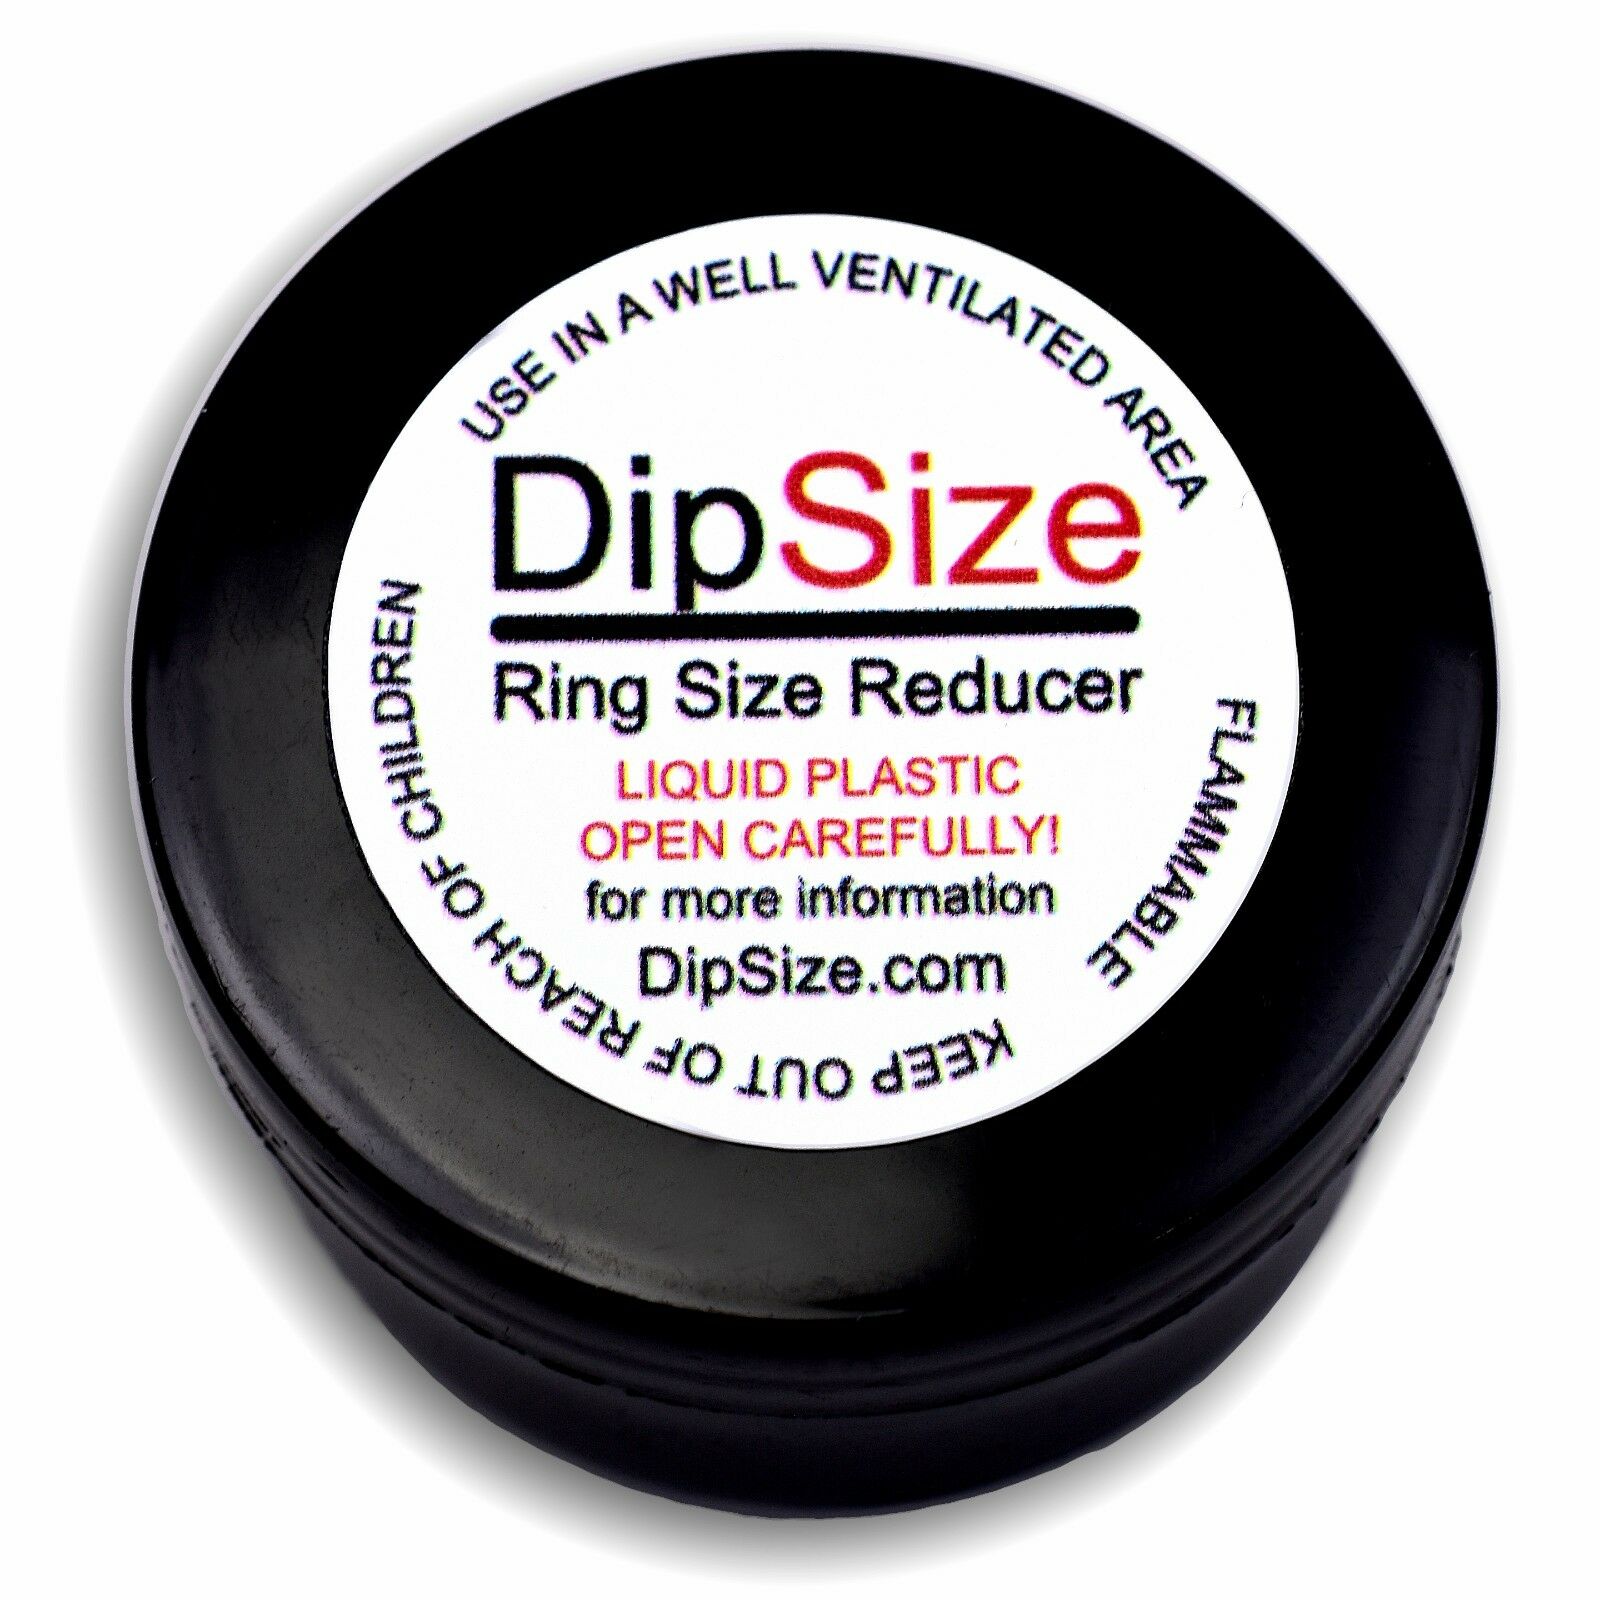 Dipsize - Ring Size Reducer - Like A Ring Guard But Better!